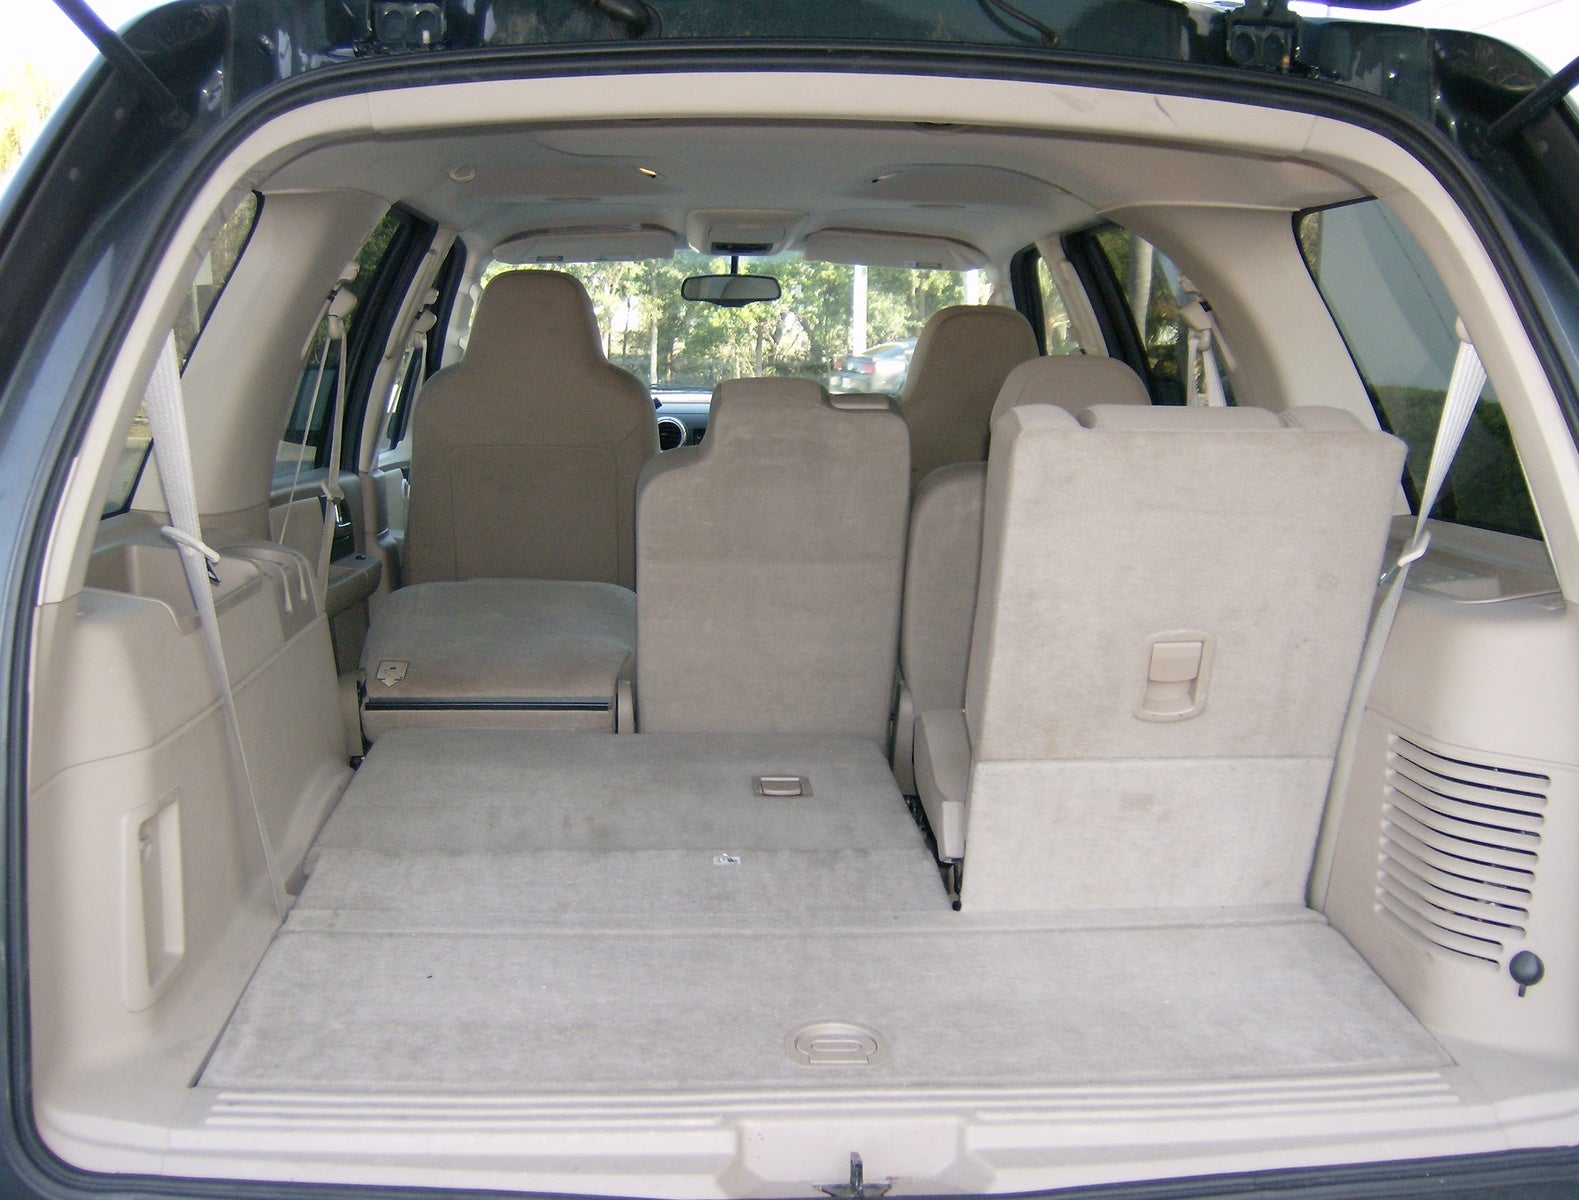 2011 Ford expedition interior dimensions